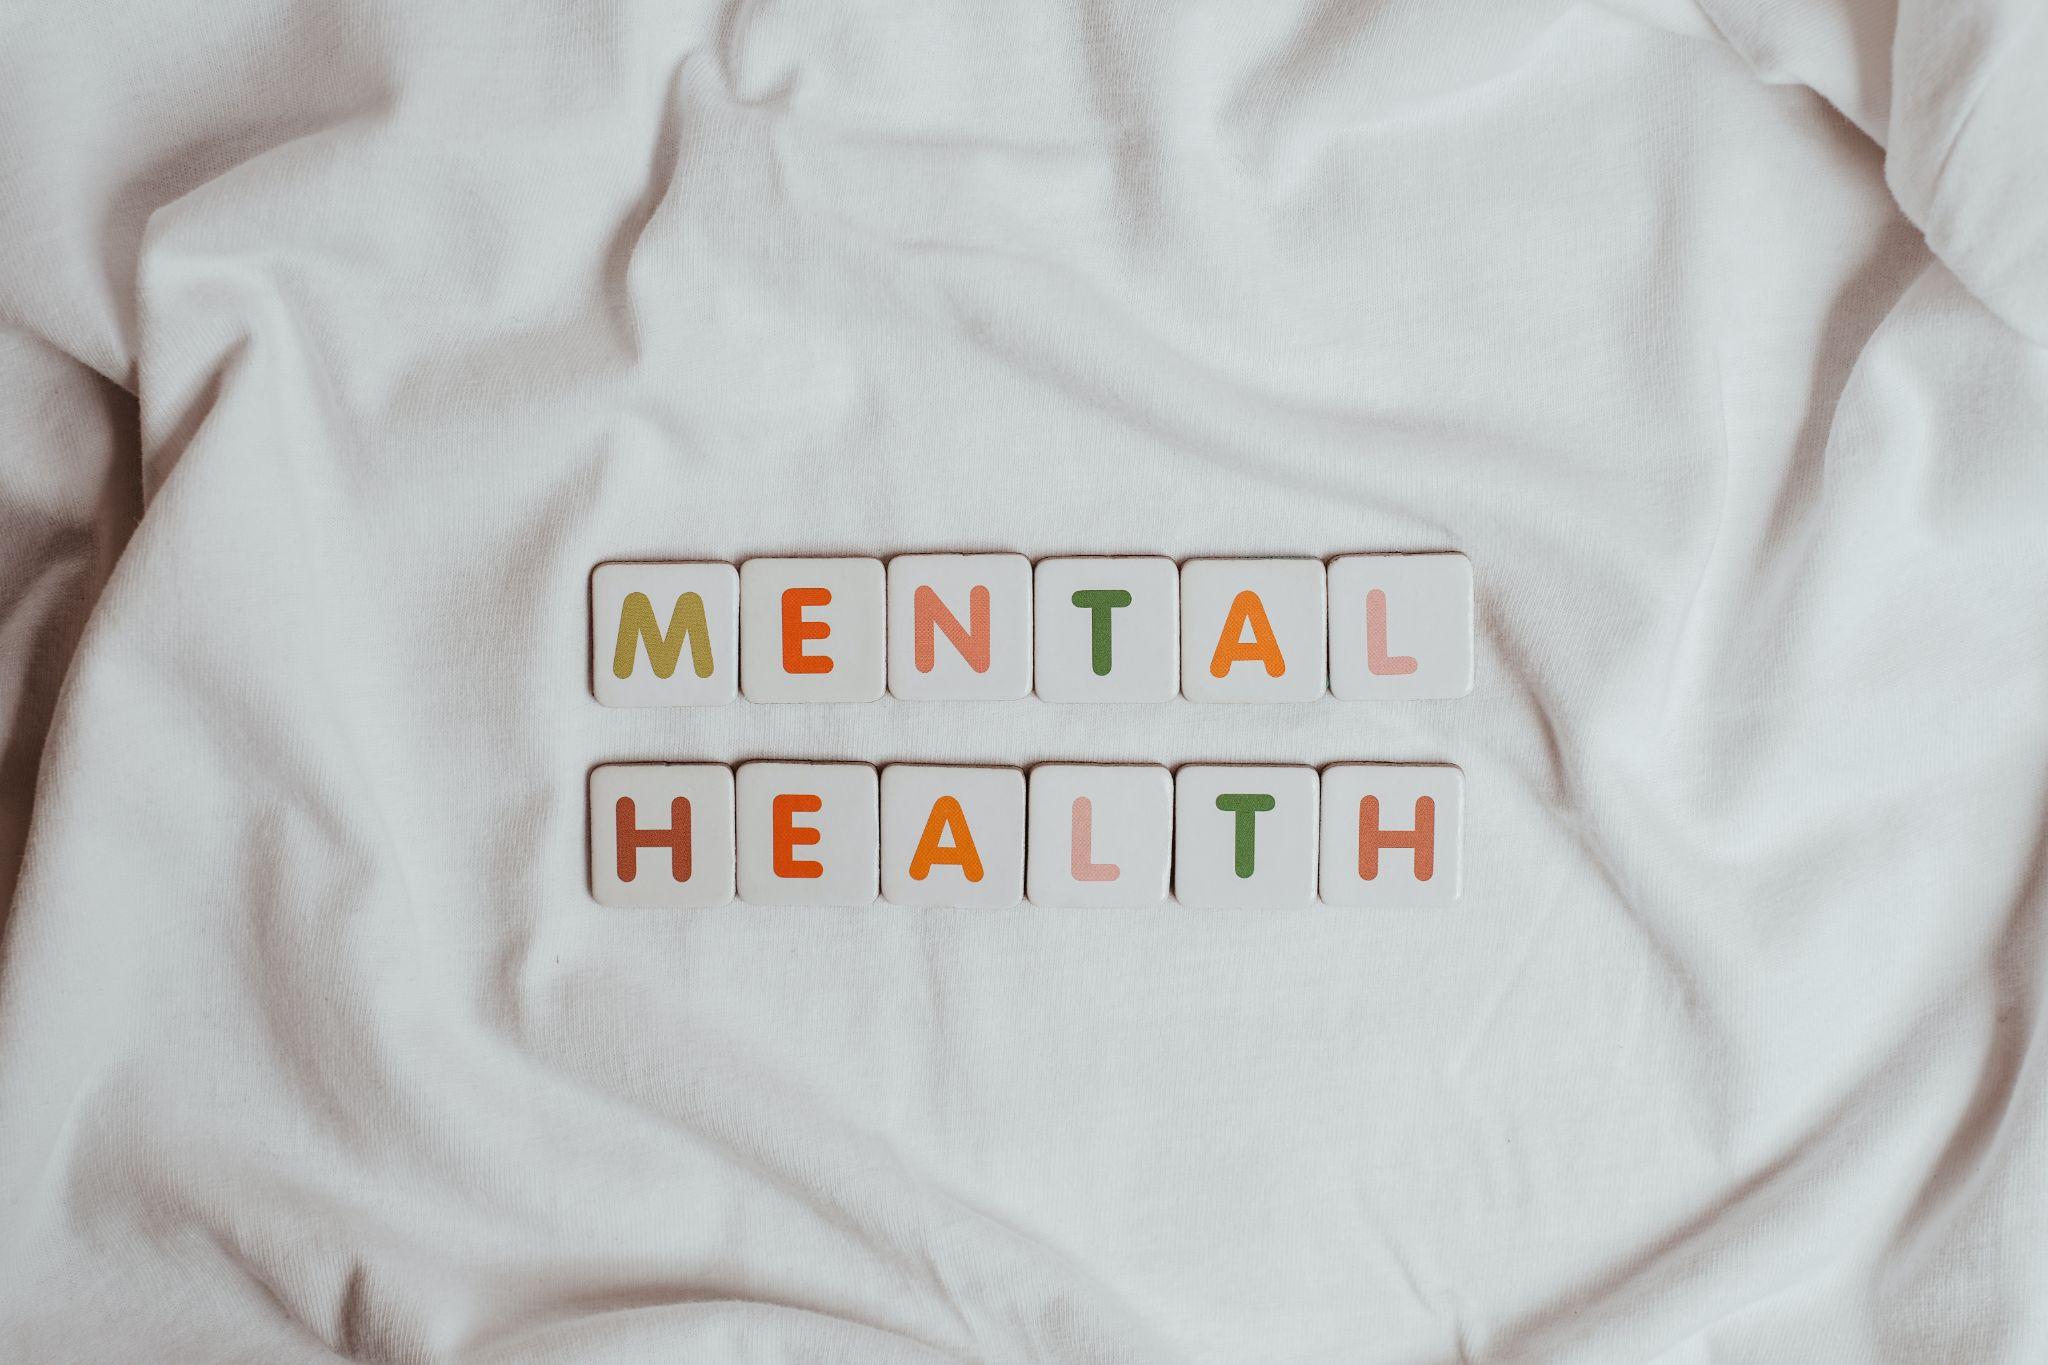 The phrase mental health on a sheet of fabric